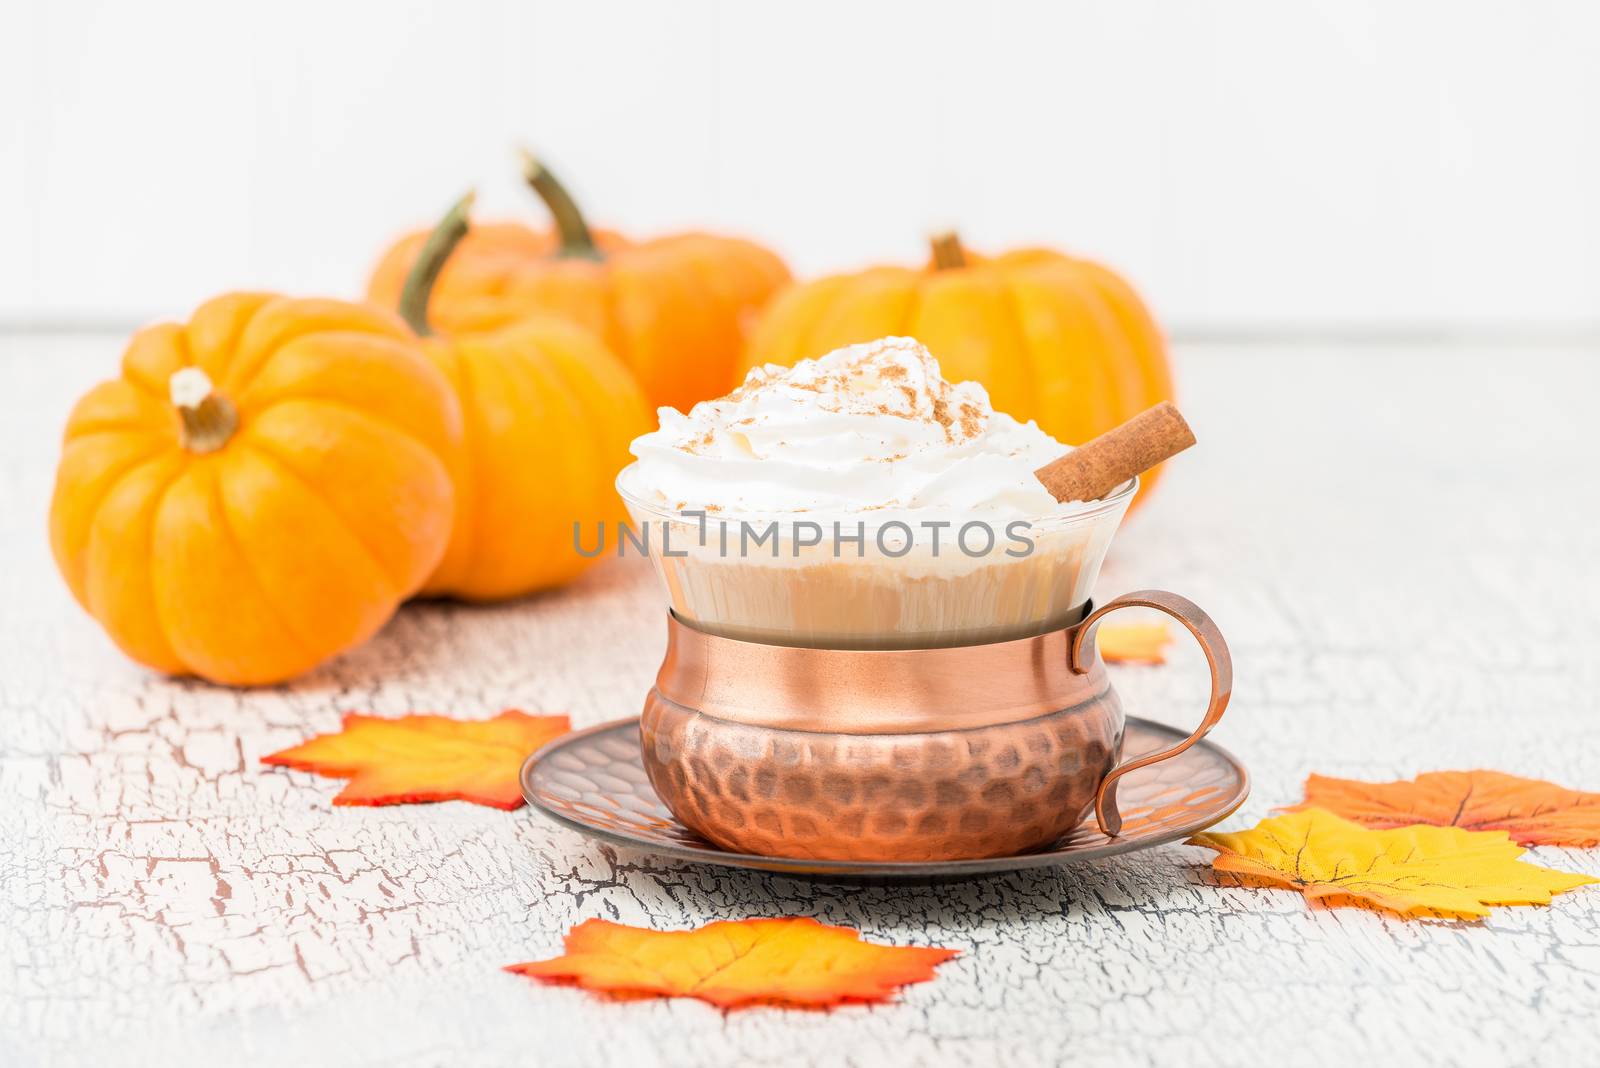 Pumpkin spice latte surrounded by pumpkins and autumn leaves.